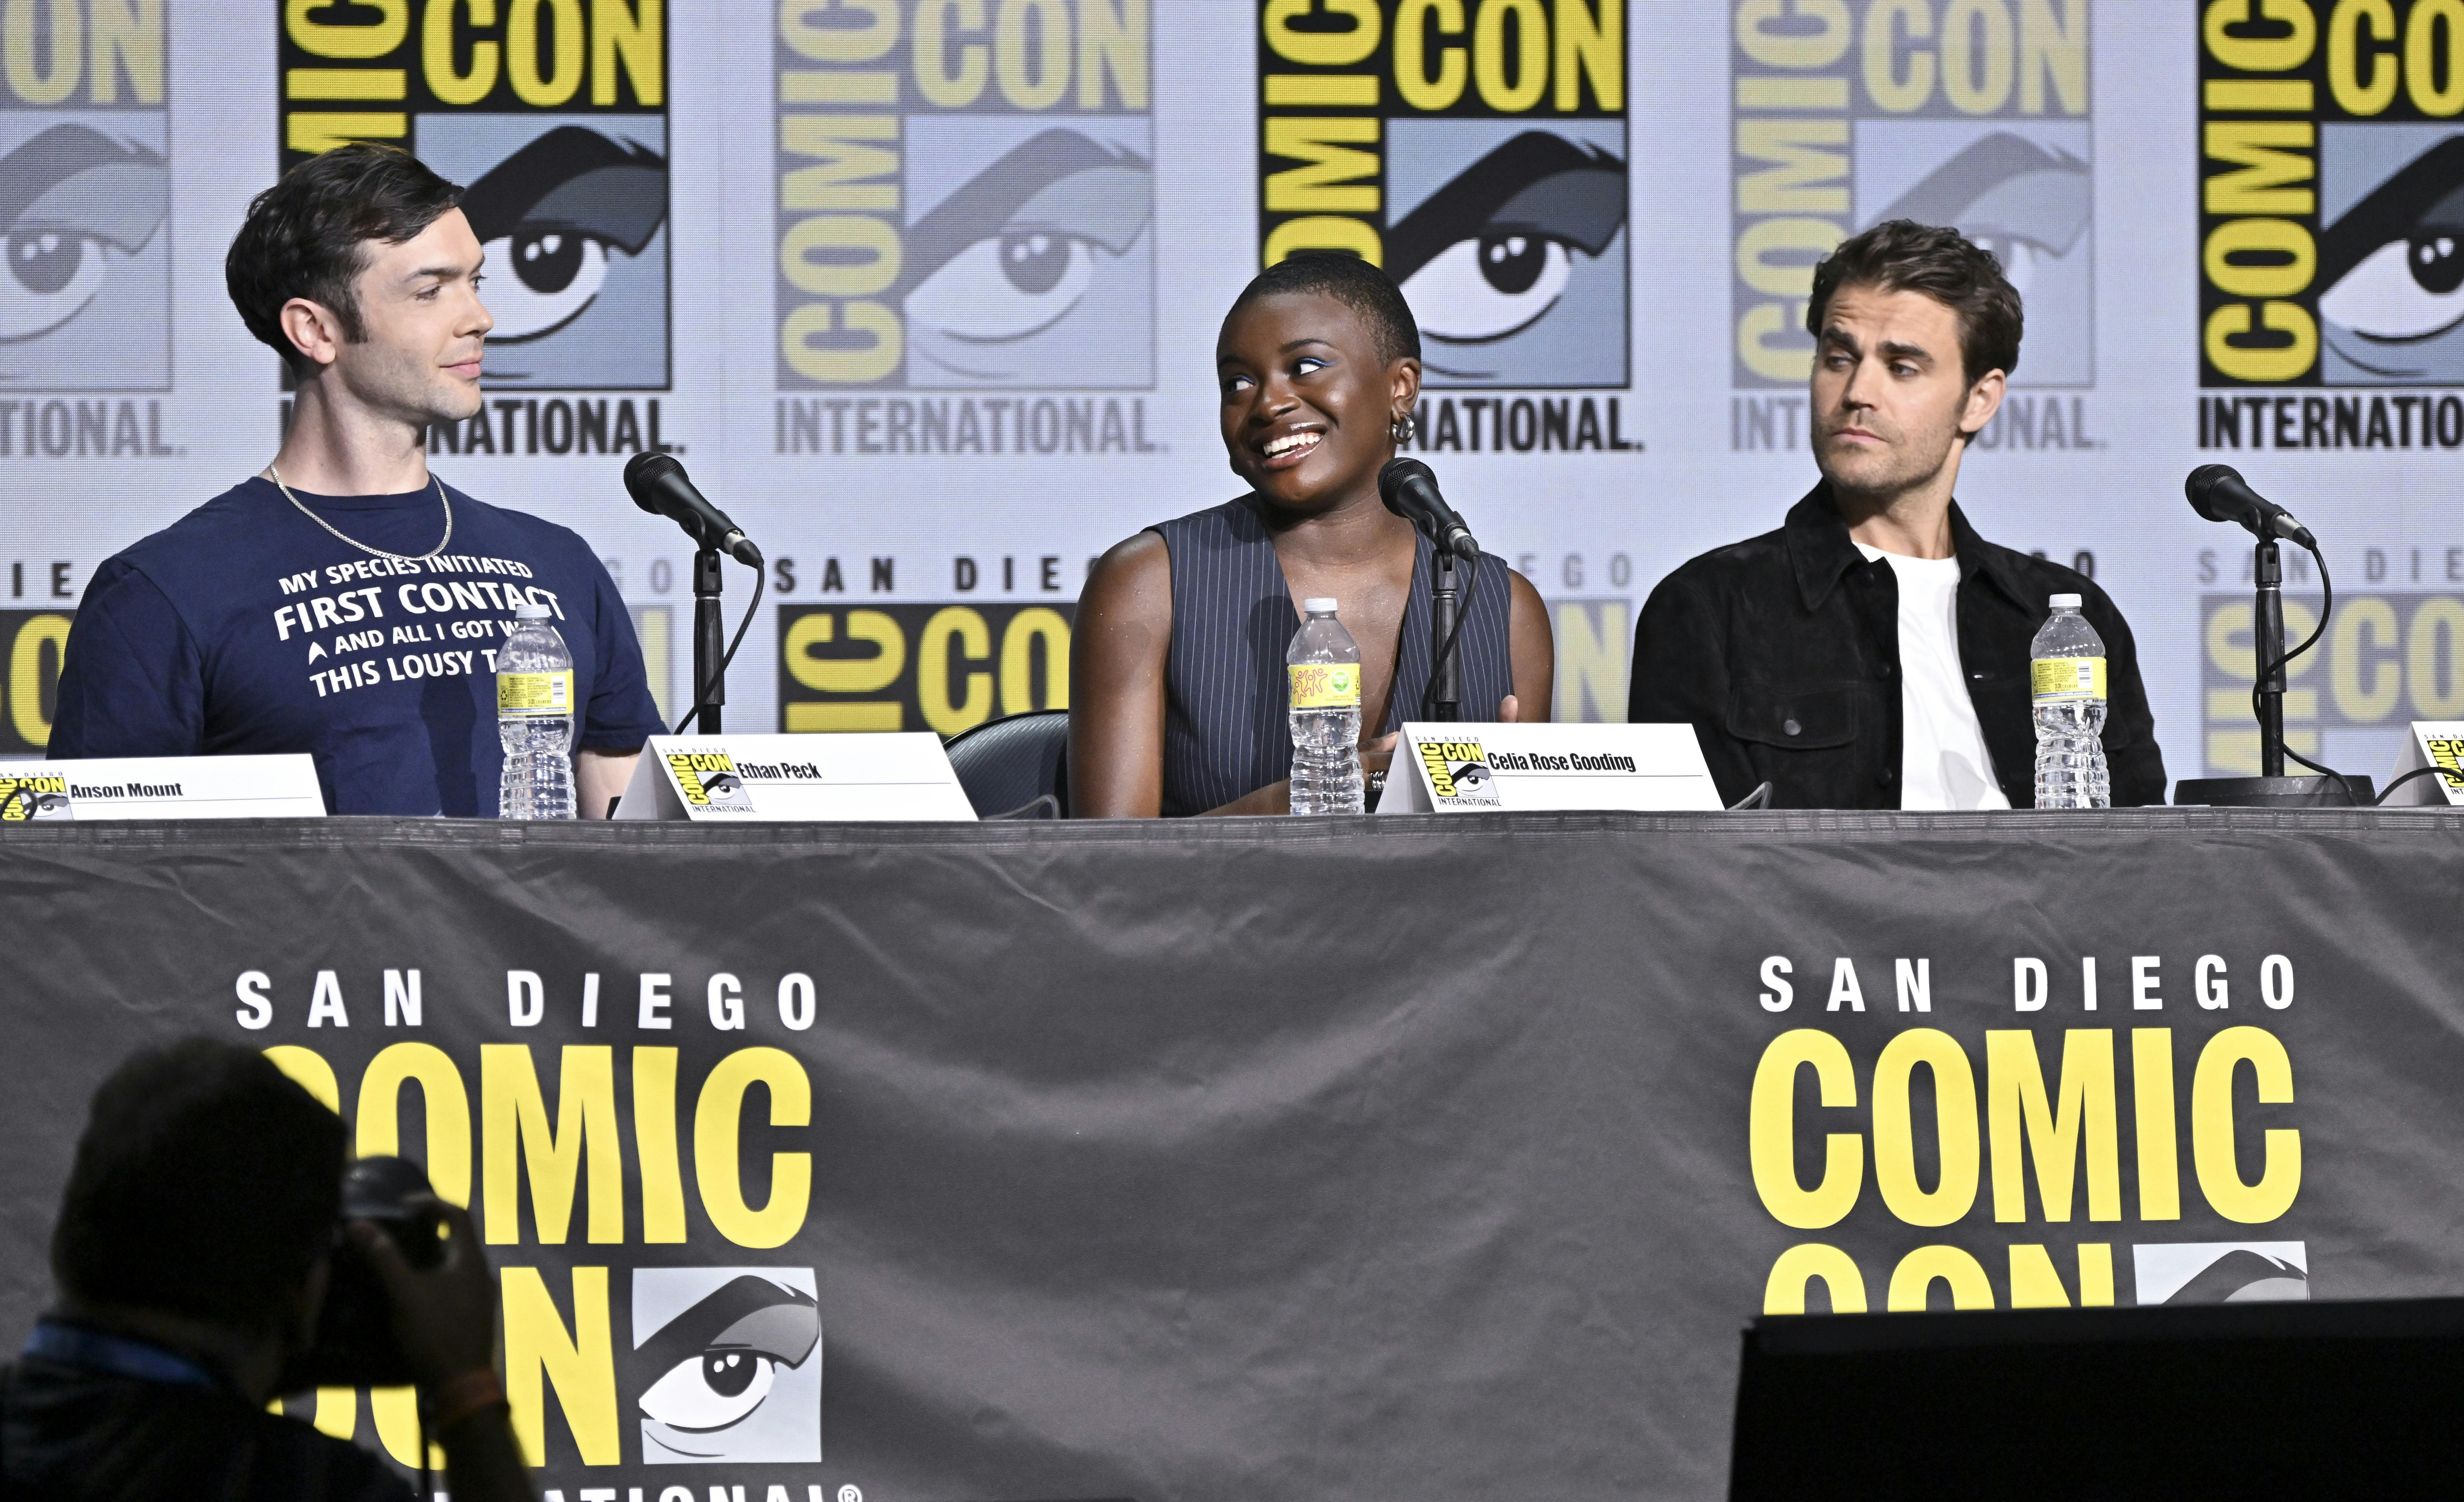 Ethan Peck and Paul Wesley listen to Celia Rose Gooding speak on the Strange New Worlds panel.